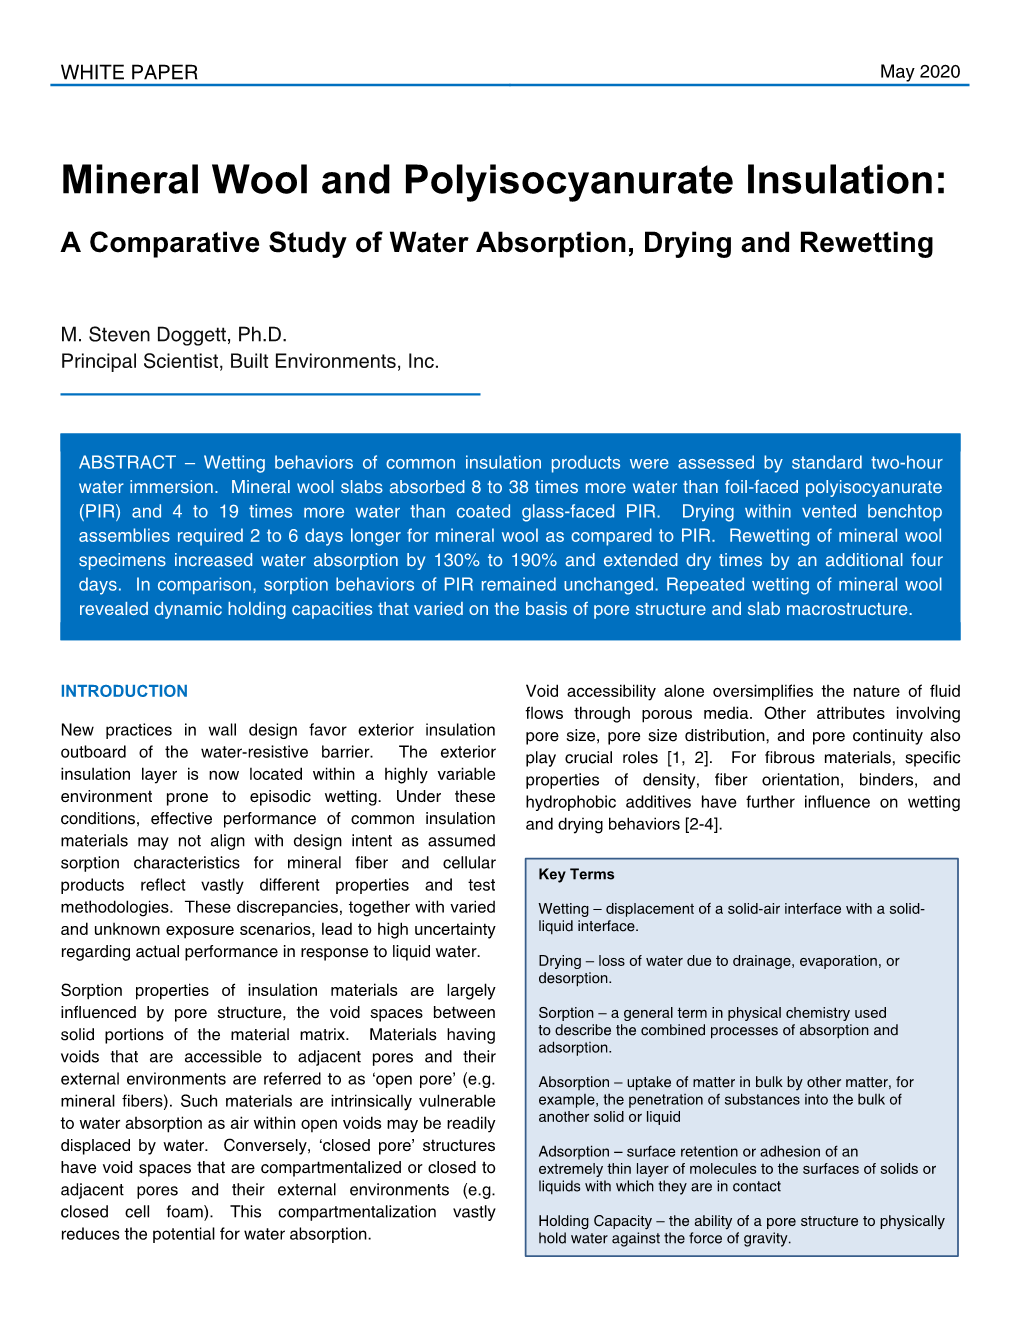 Mineral Wool and Polyisocyanurate Insulation: a Comparative Study of Water Absorption, Drying and Rewetting